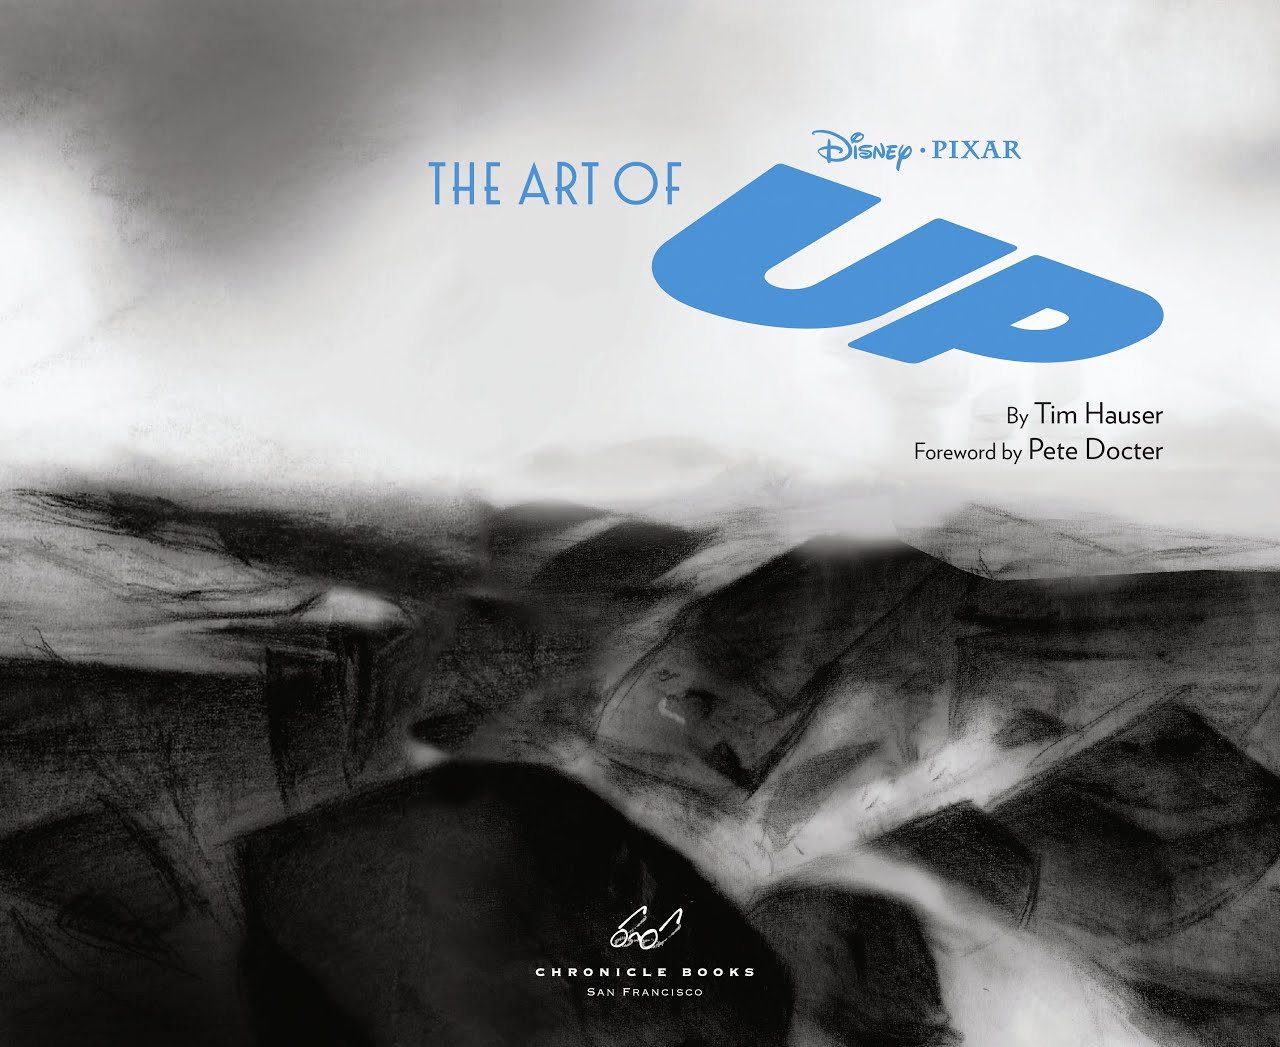 The Art of Up 3